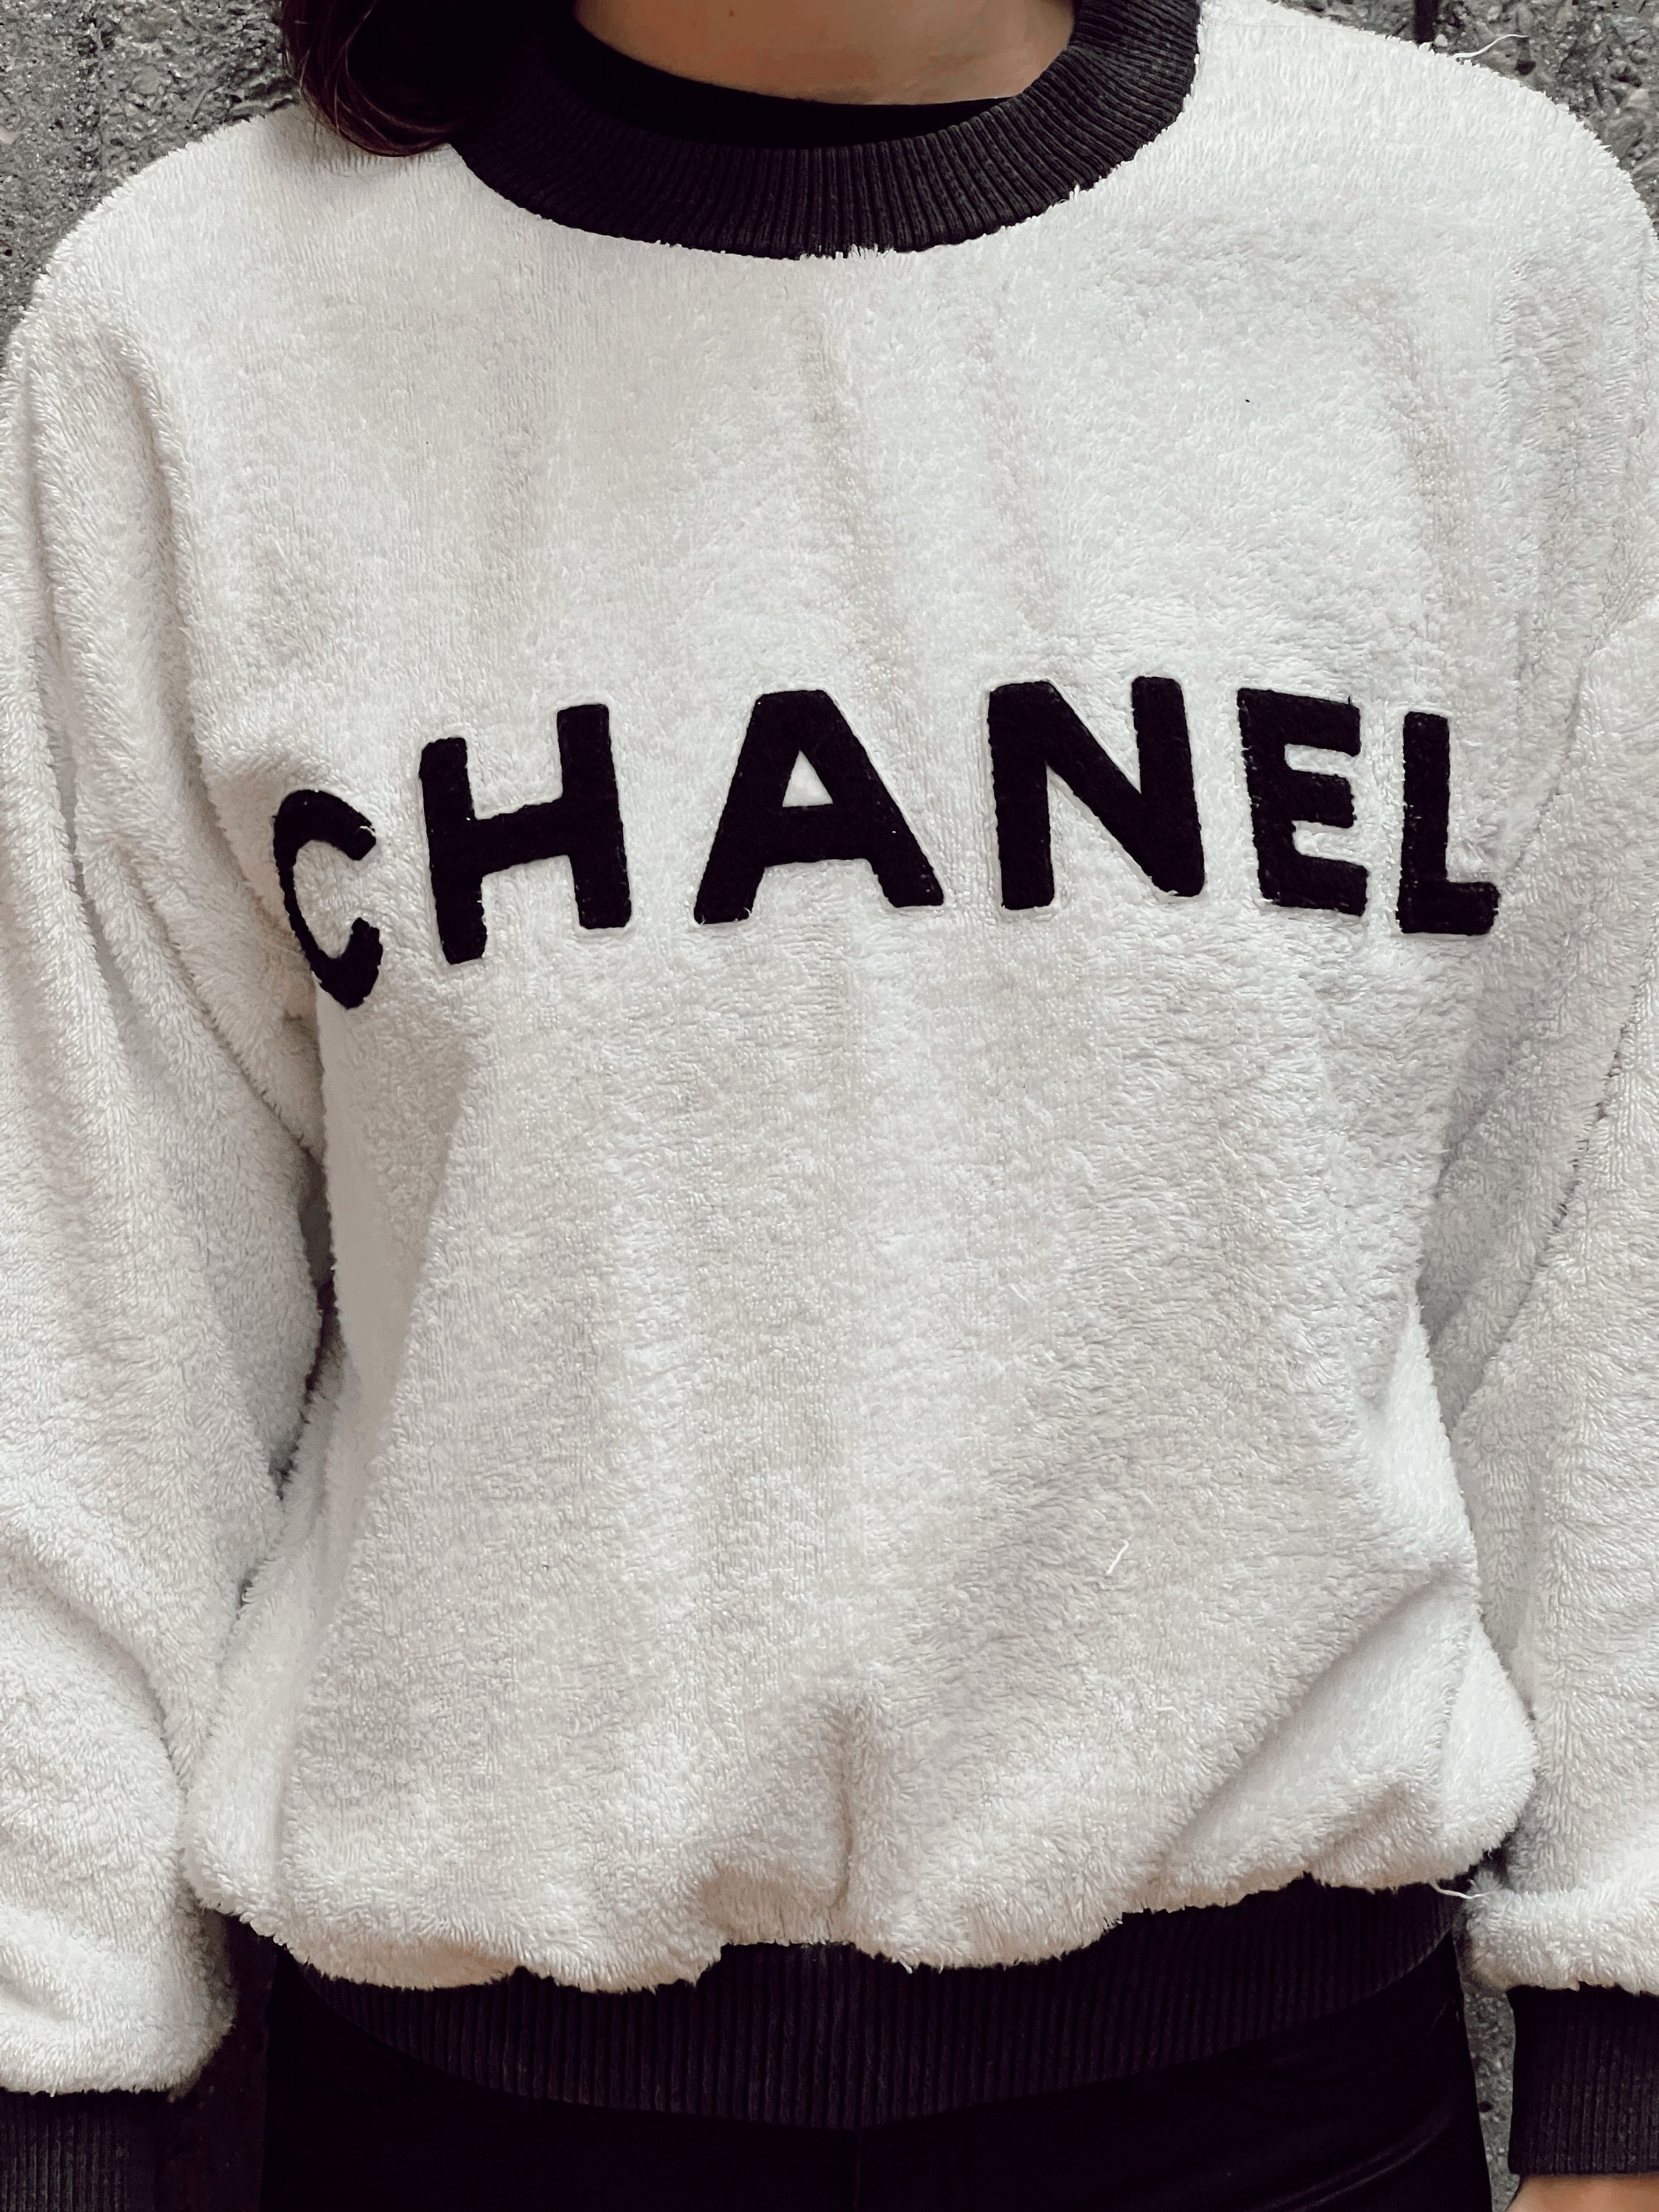 chanel t shirts for women